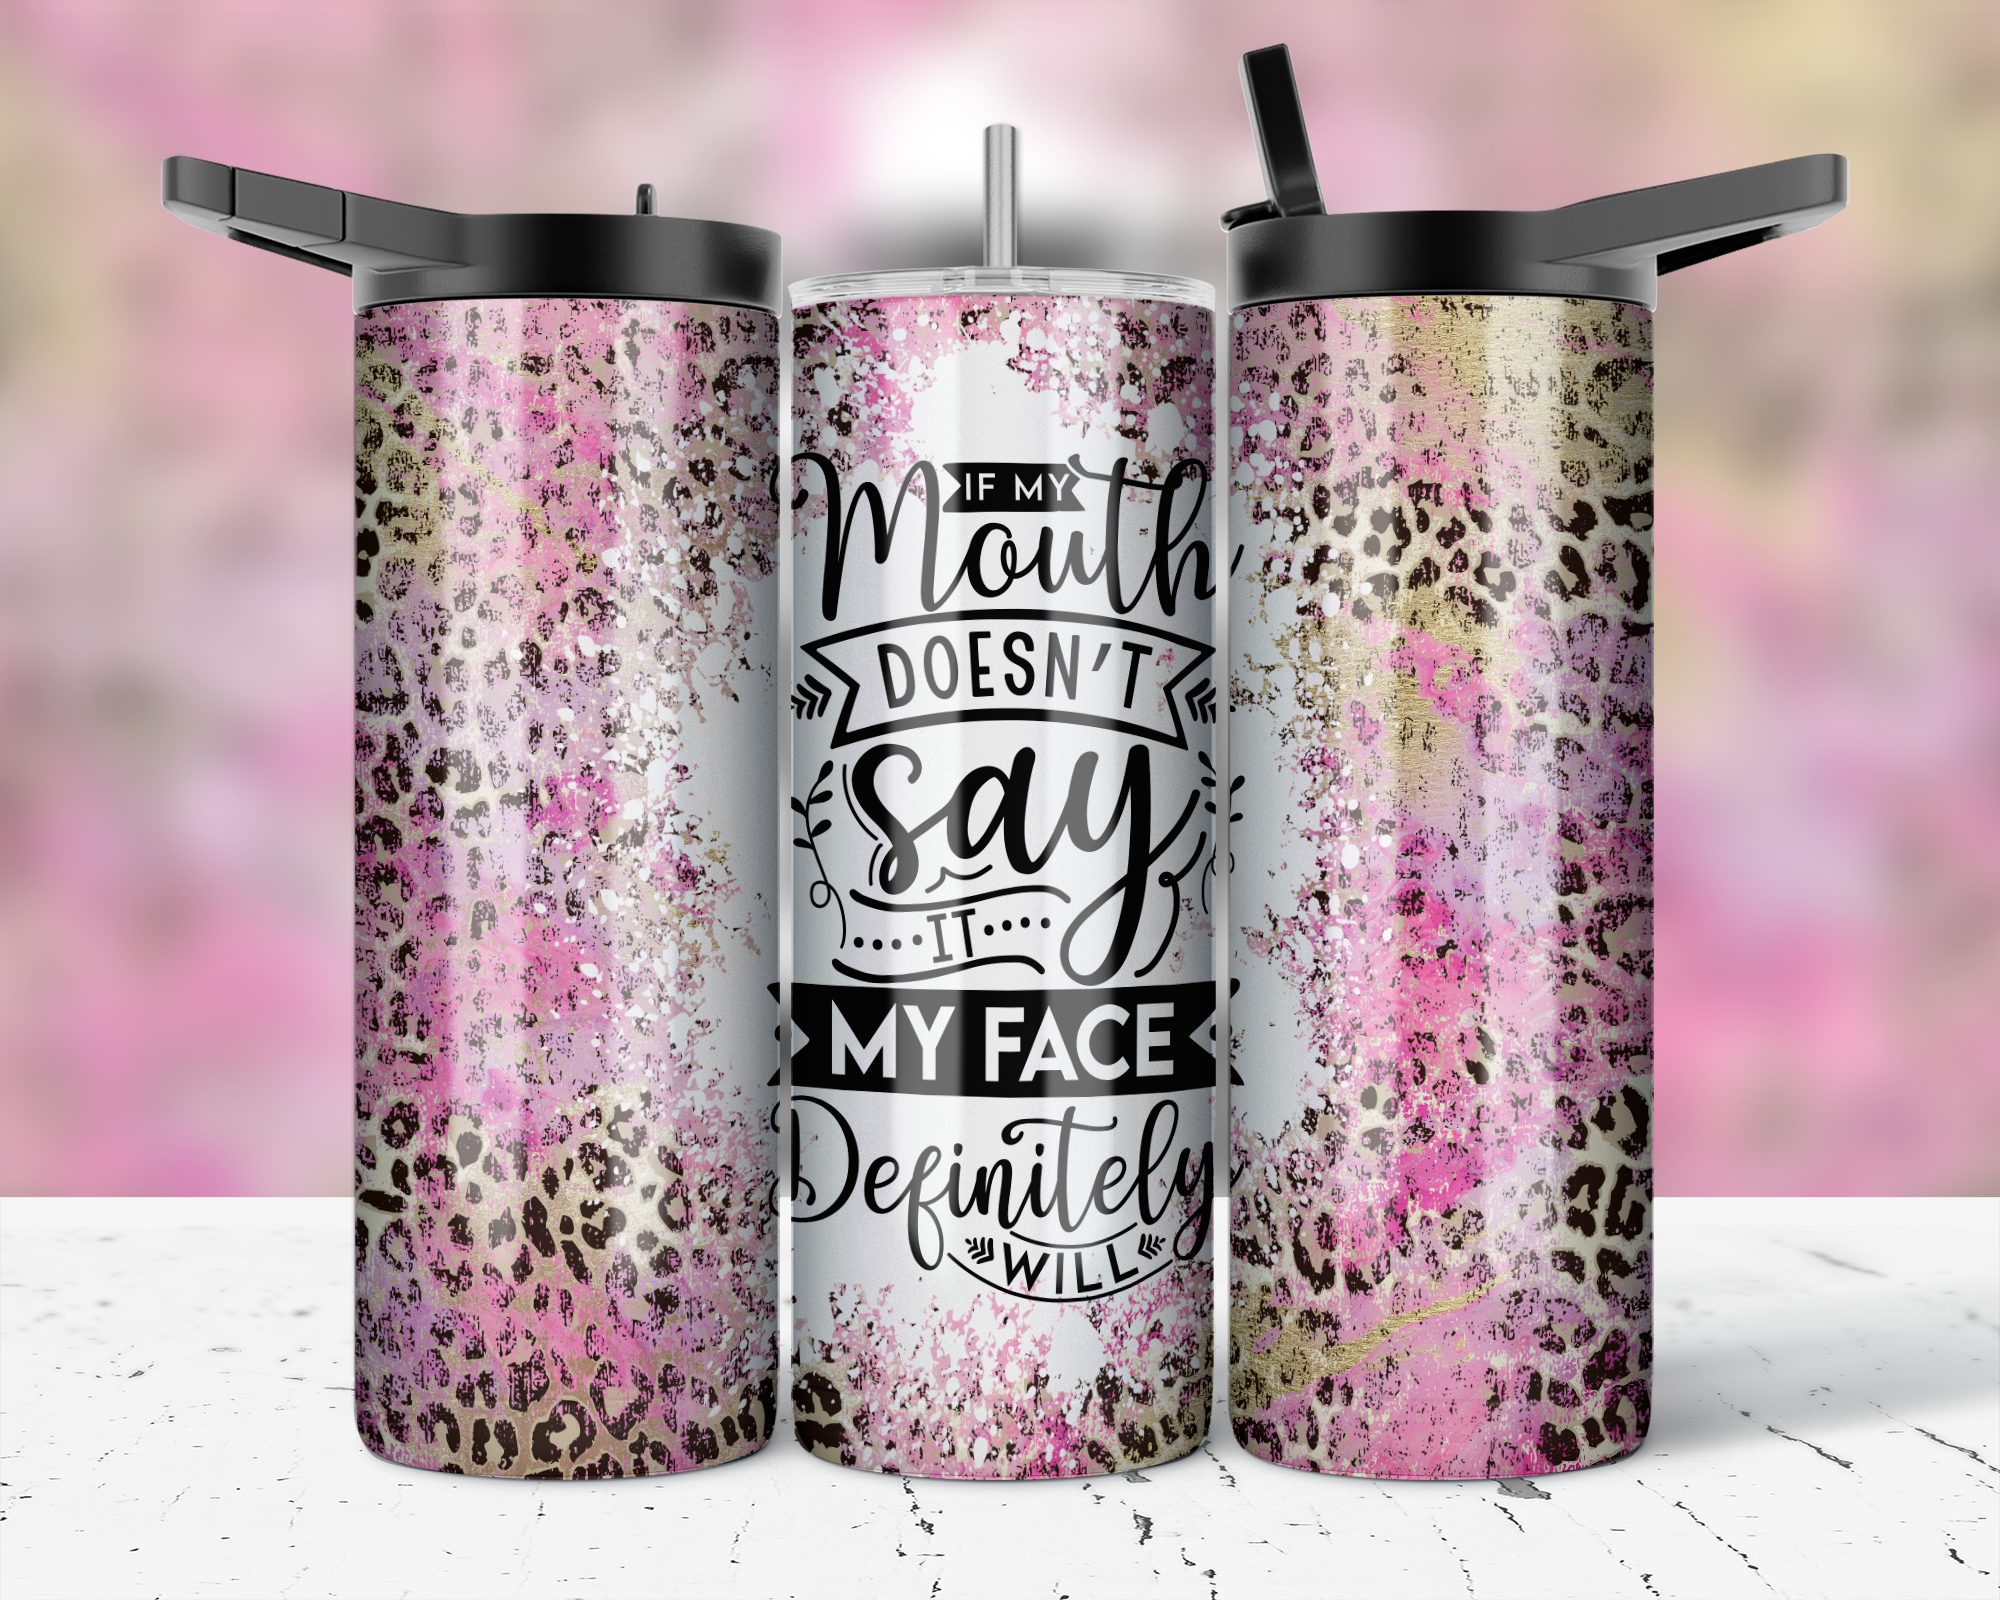 4 Pack 20 oz Sublimation Tapered Travel Tumbler